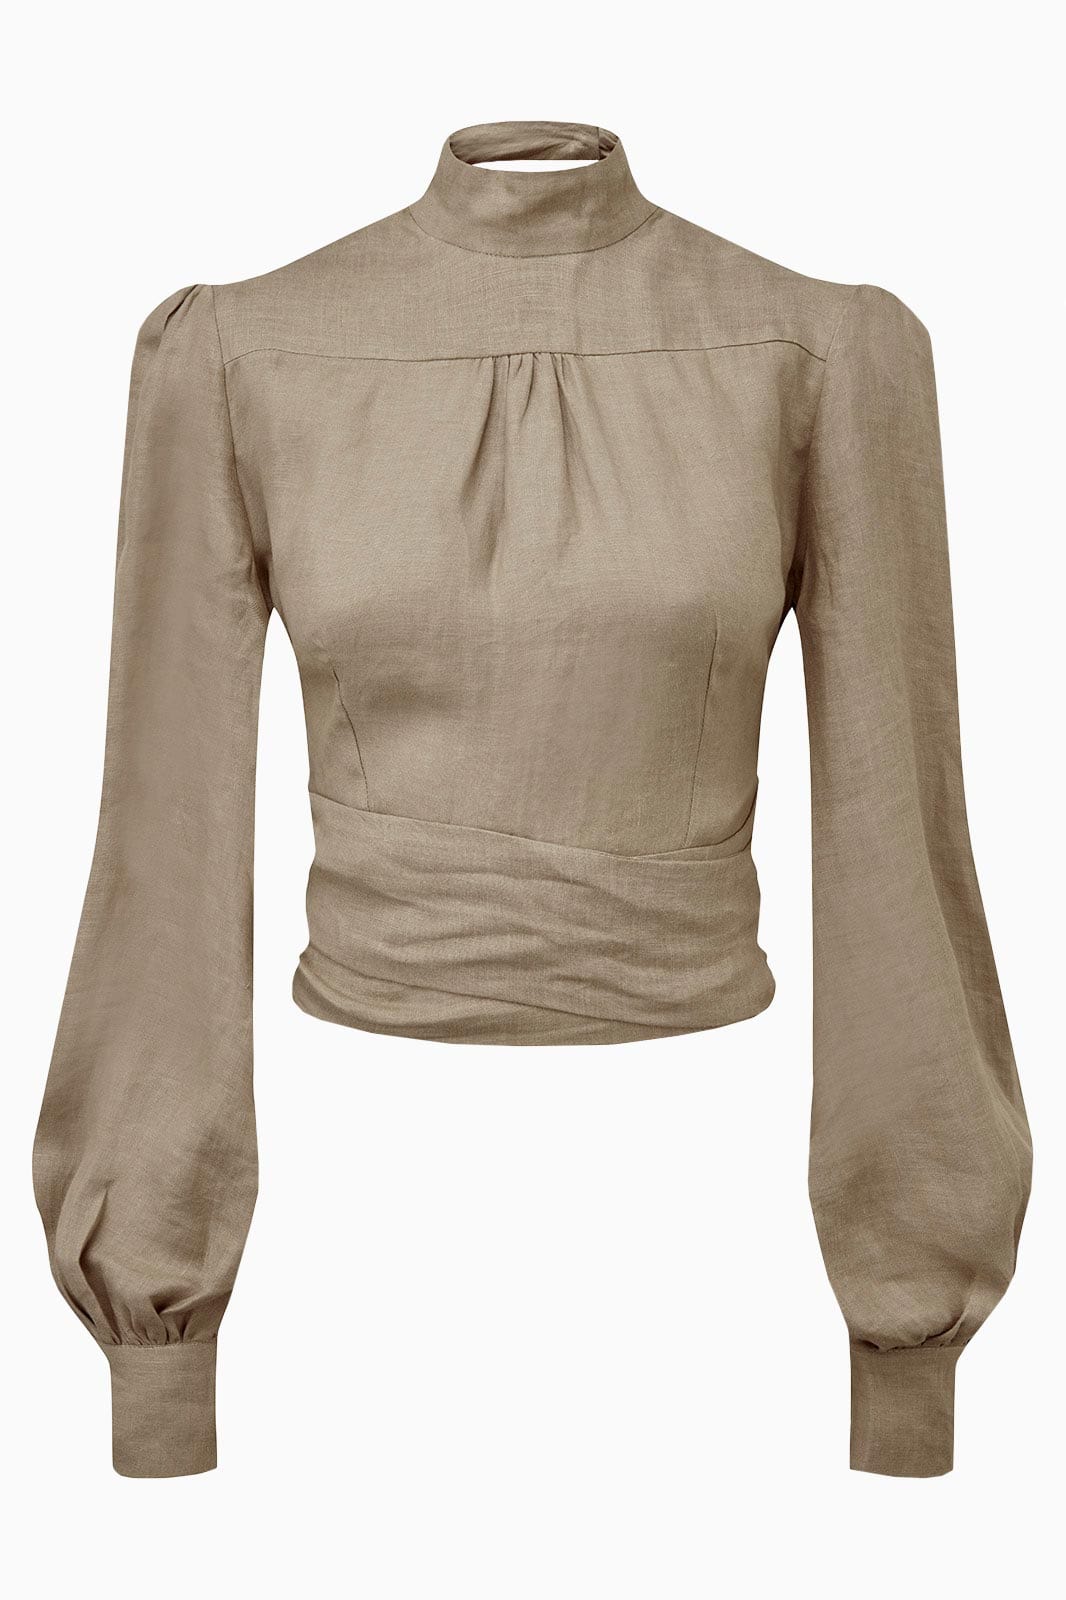 arkitaip Tops The Gabri Linen Wrap Top in Taupe